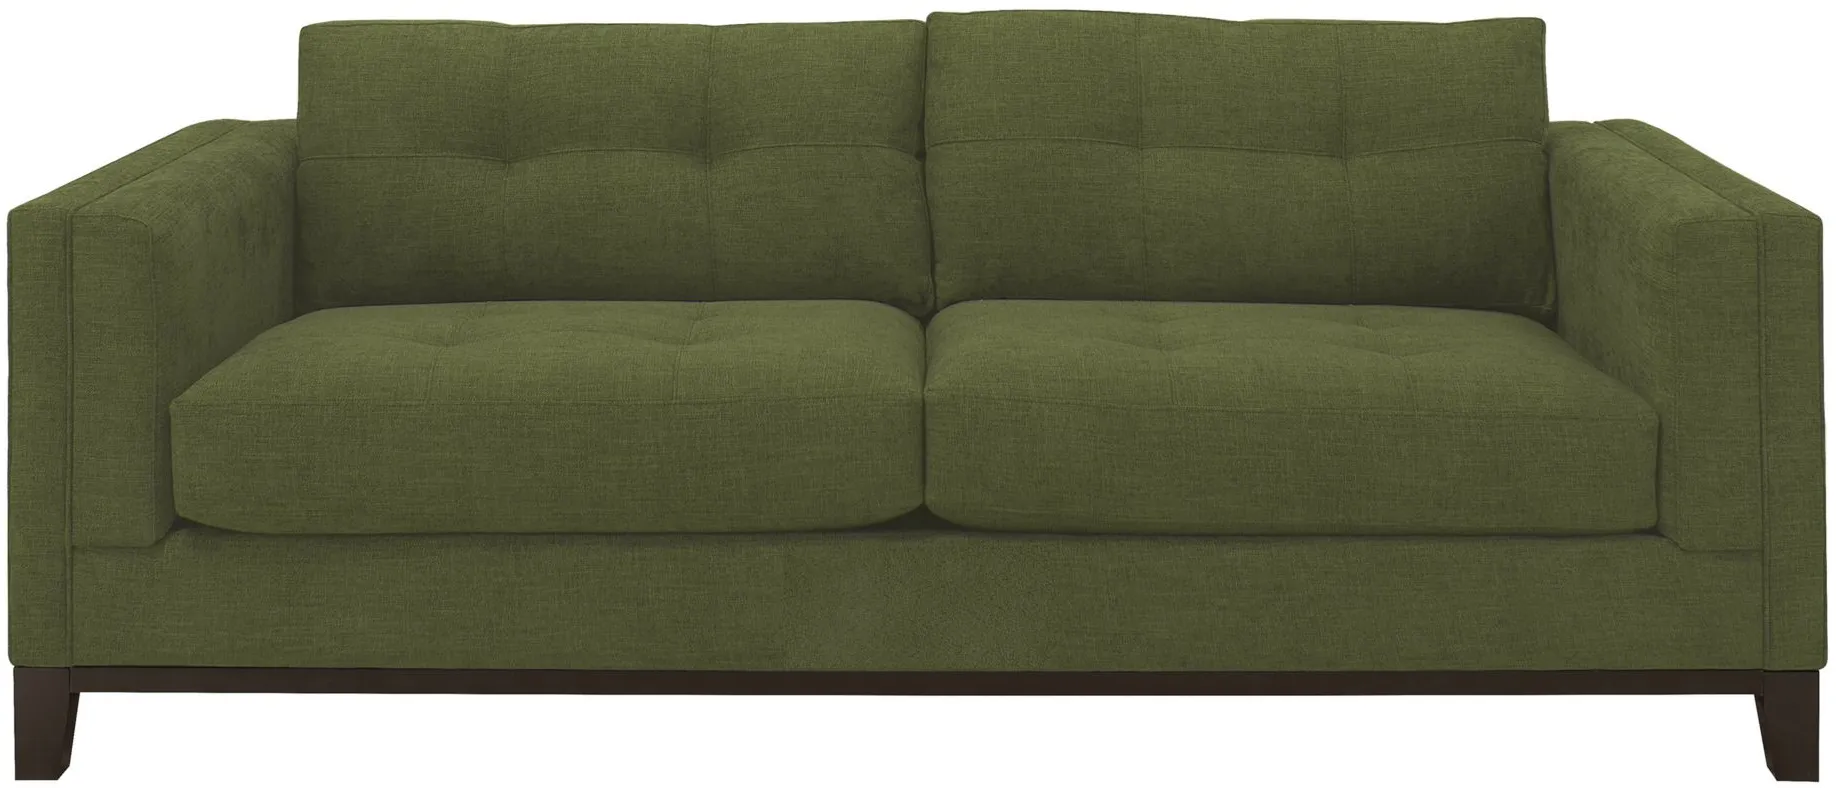 Mirasol Sofa in Suede so Soft Pine by H.M. Richards